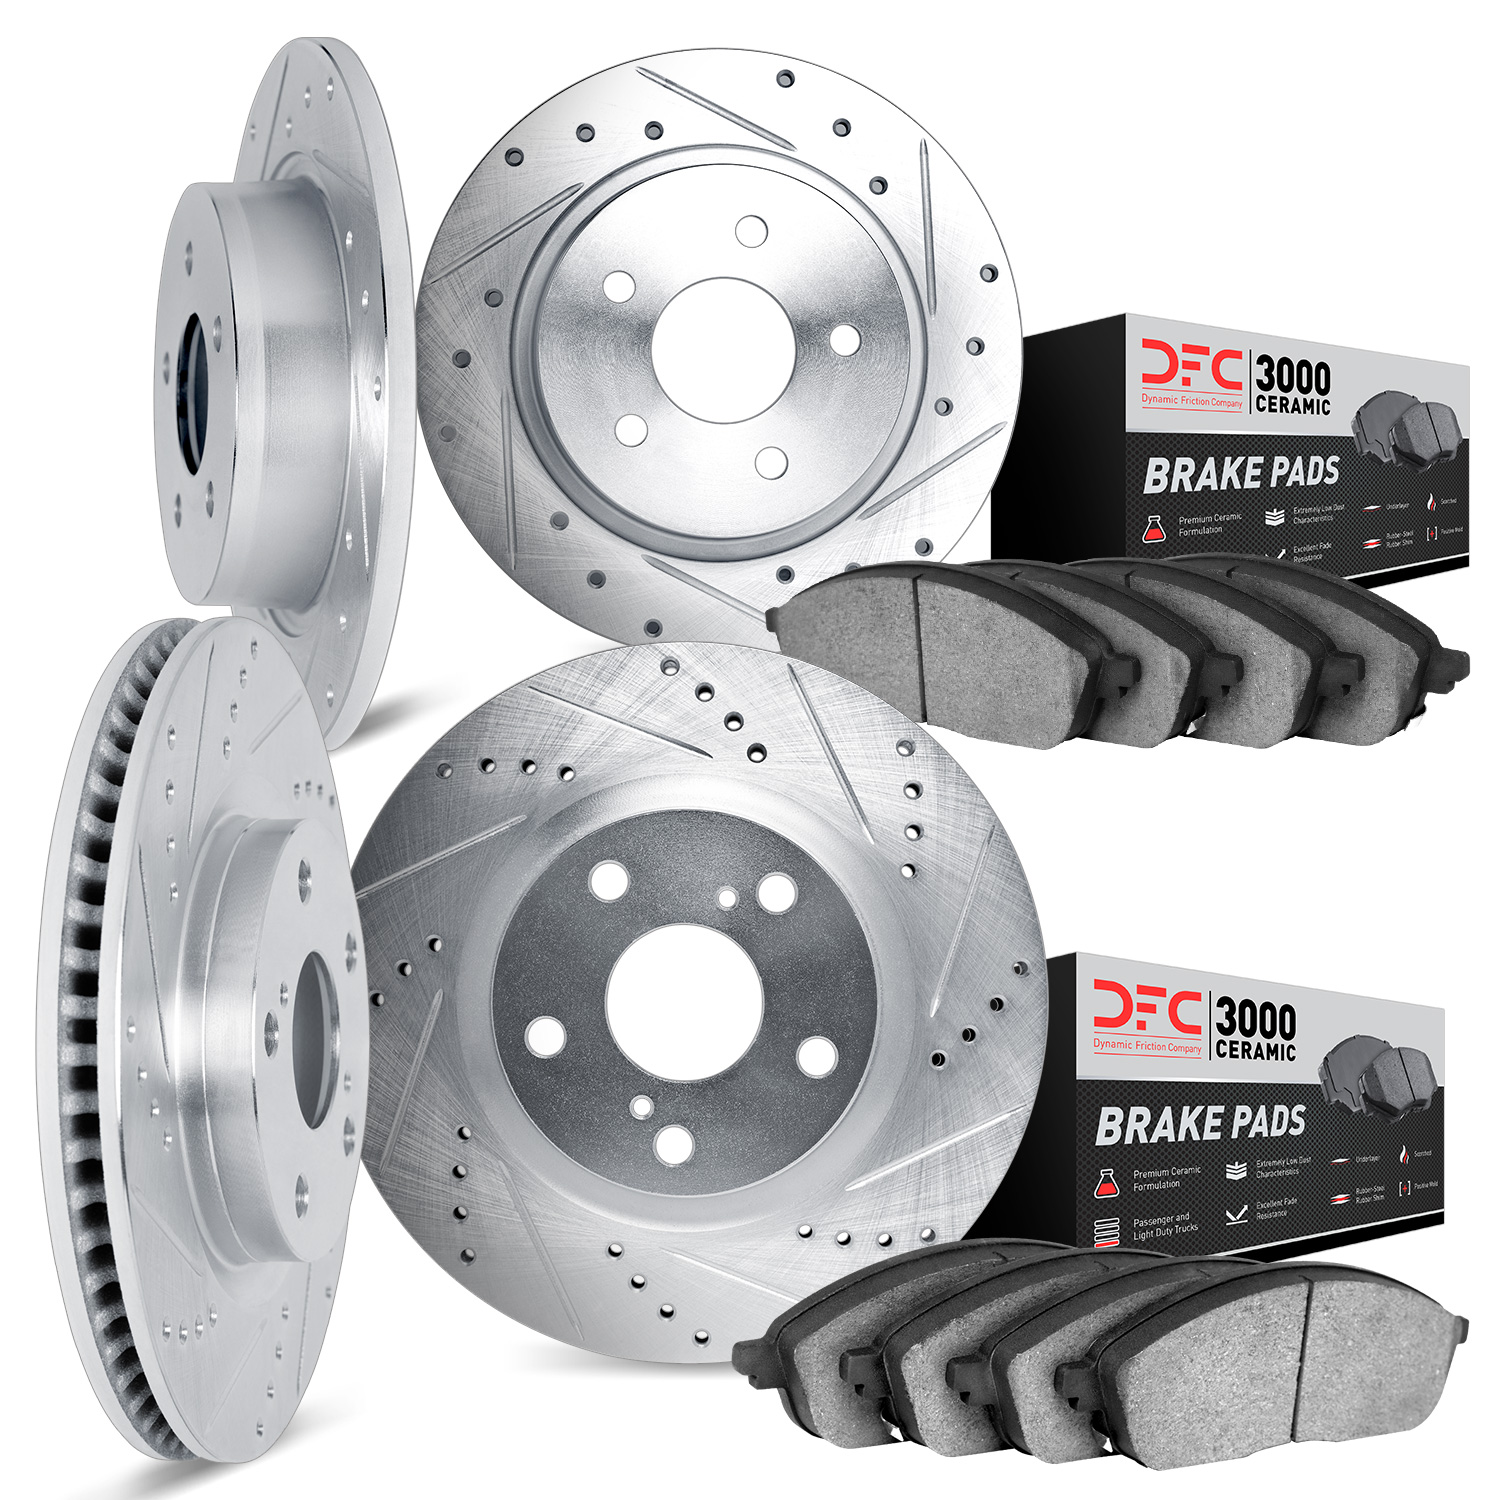 7304-54078 Drilled/Slotted Brake Rotor with 3000-Series Ceramic Brake Pads Kit [Silver], 2005-2009 Ford/Lincoln/Mercury/Mazda, P